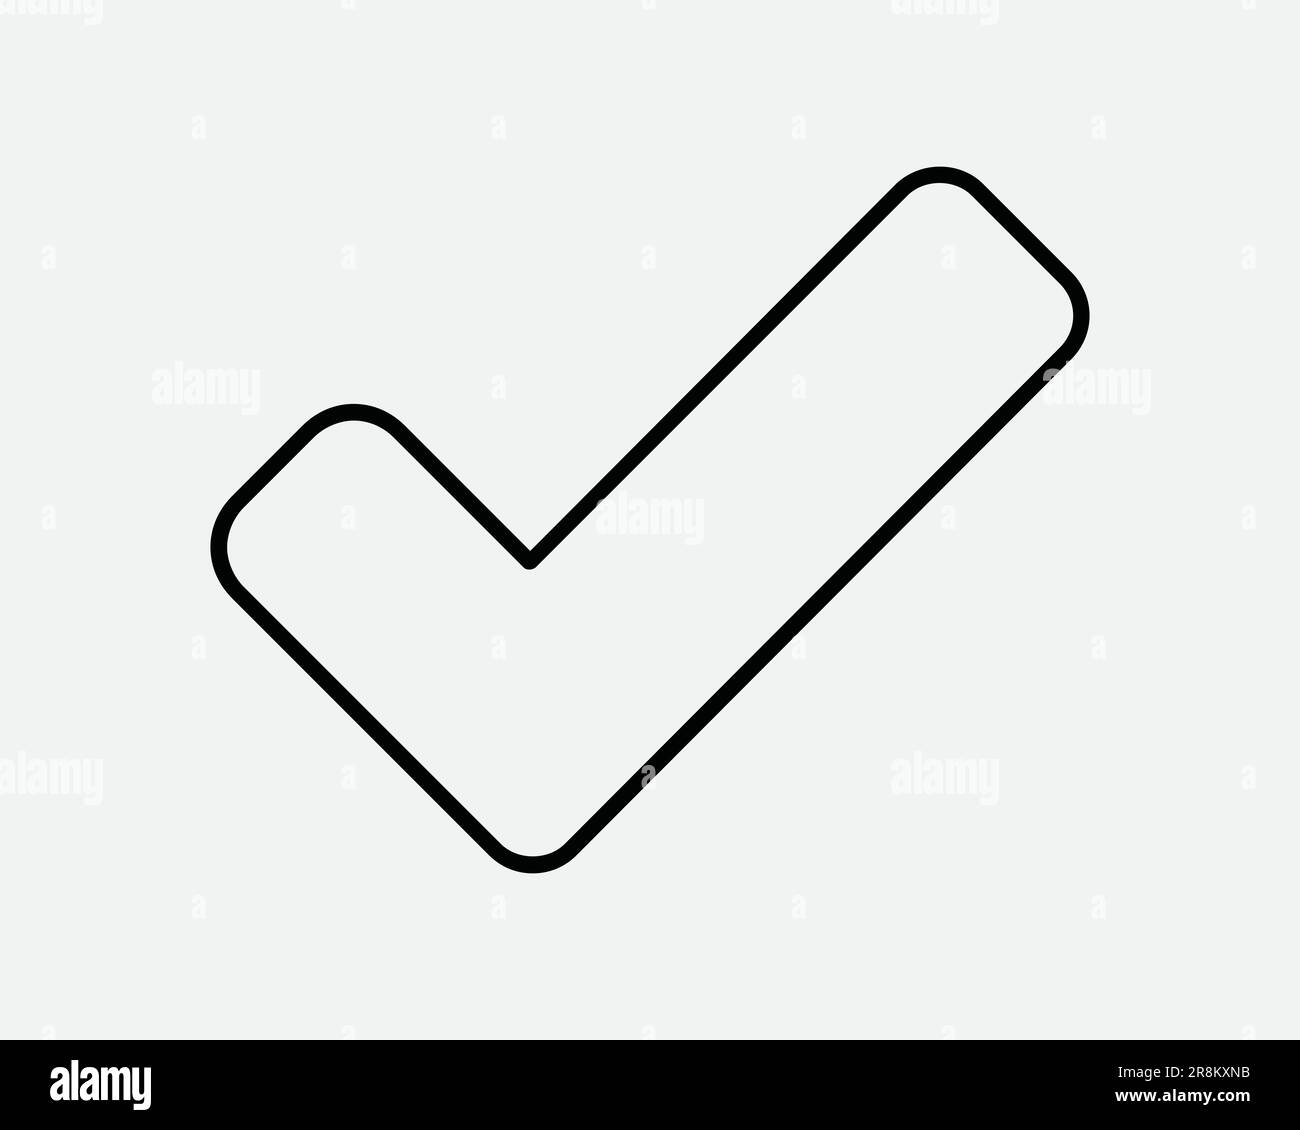 Tick Line Icon. Ok Correct Right Approve Confirm Verify Mark Okay Vote Agree Choice Pass. Black White Sign Symbol Artwork Graphic Clipart EPS Vector Stock Vector